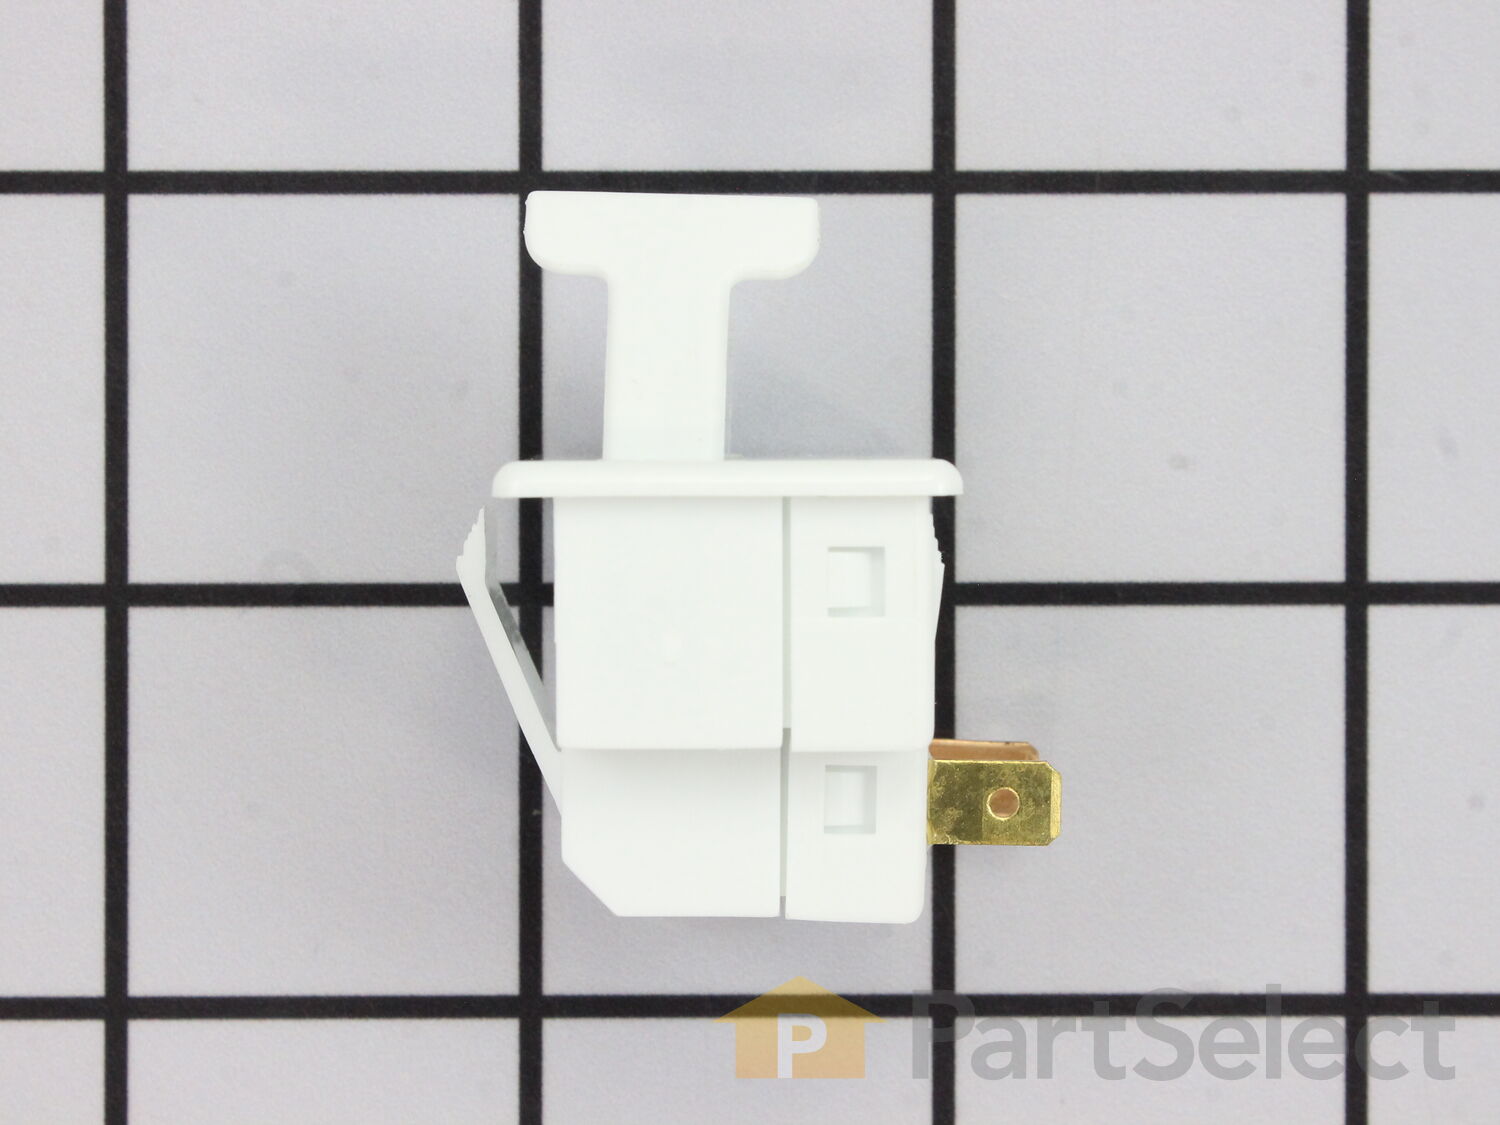 For General Electric Refrigerator Door Light Switch # OD6906975GE152 